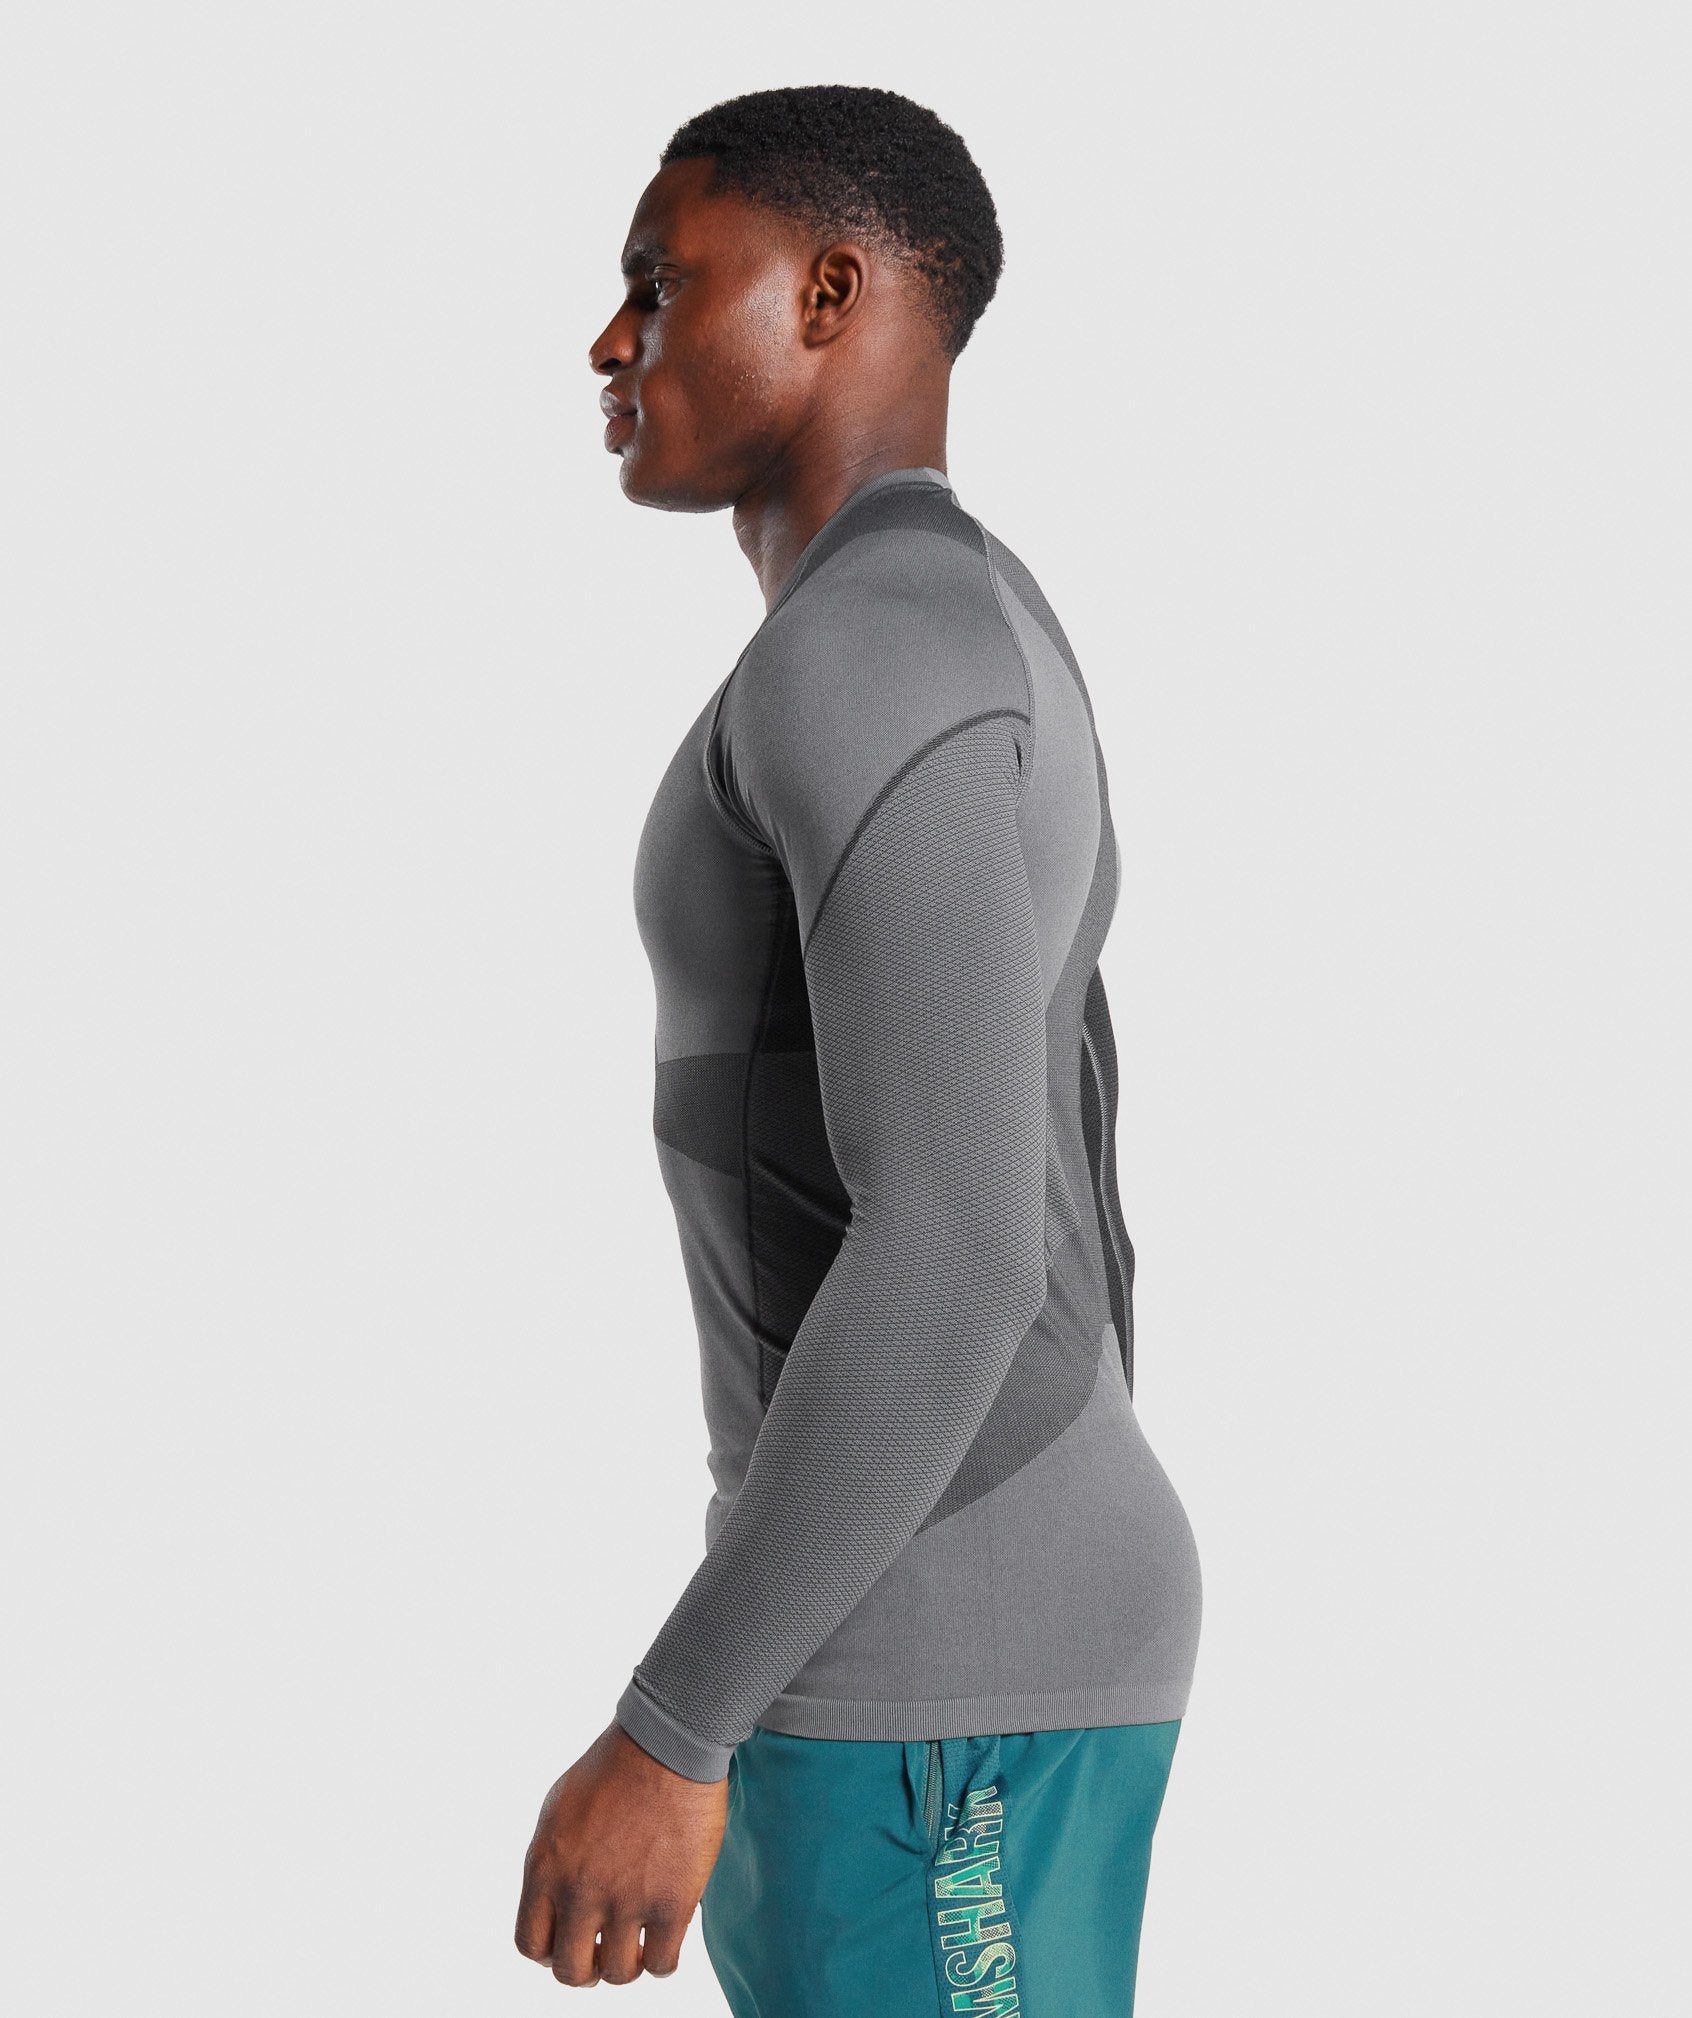 Gymflux Long Sleeve Compression T, Grey – Gymflux Official Store, Gym  Clothes and Workout Wear